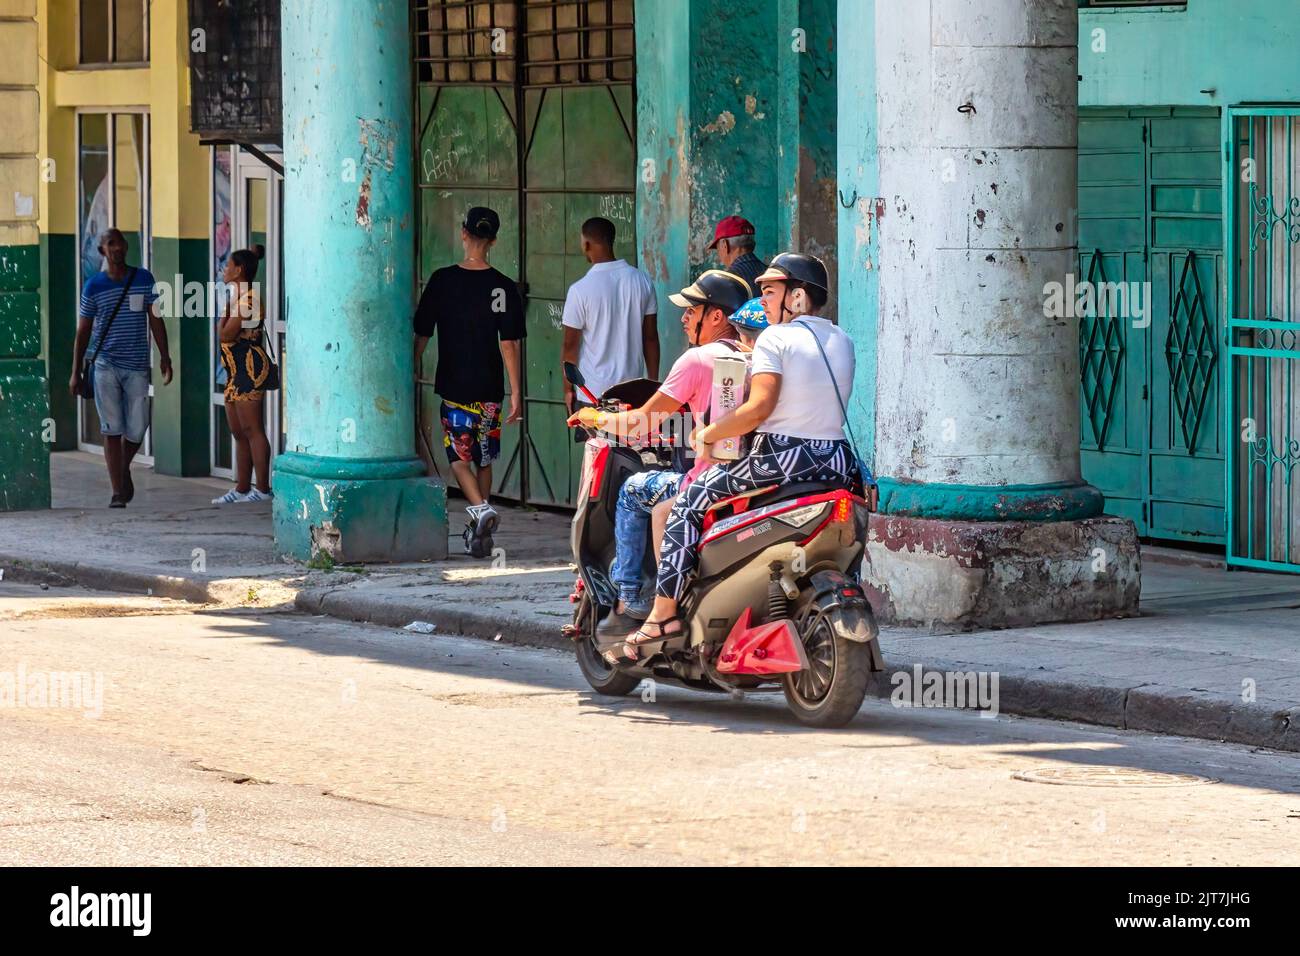 An electric bicycle carries a family of three people. Other people are walking in a porch where buildings are weathered and dirty Stock Photo